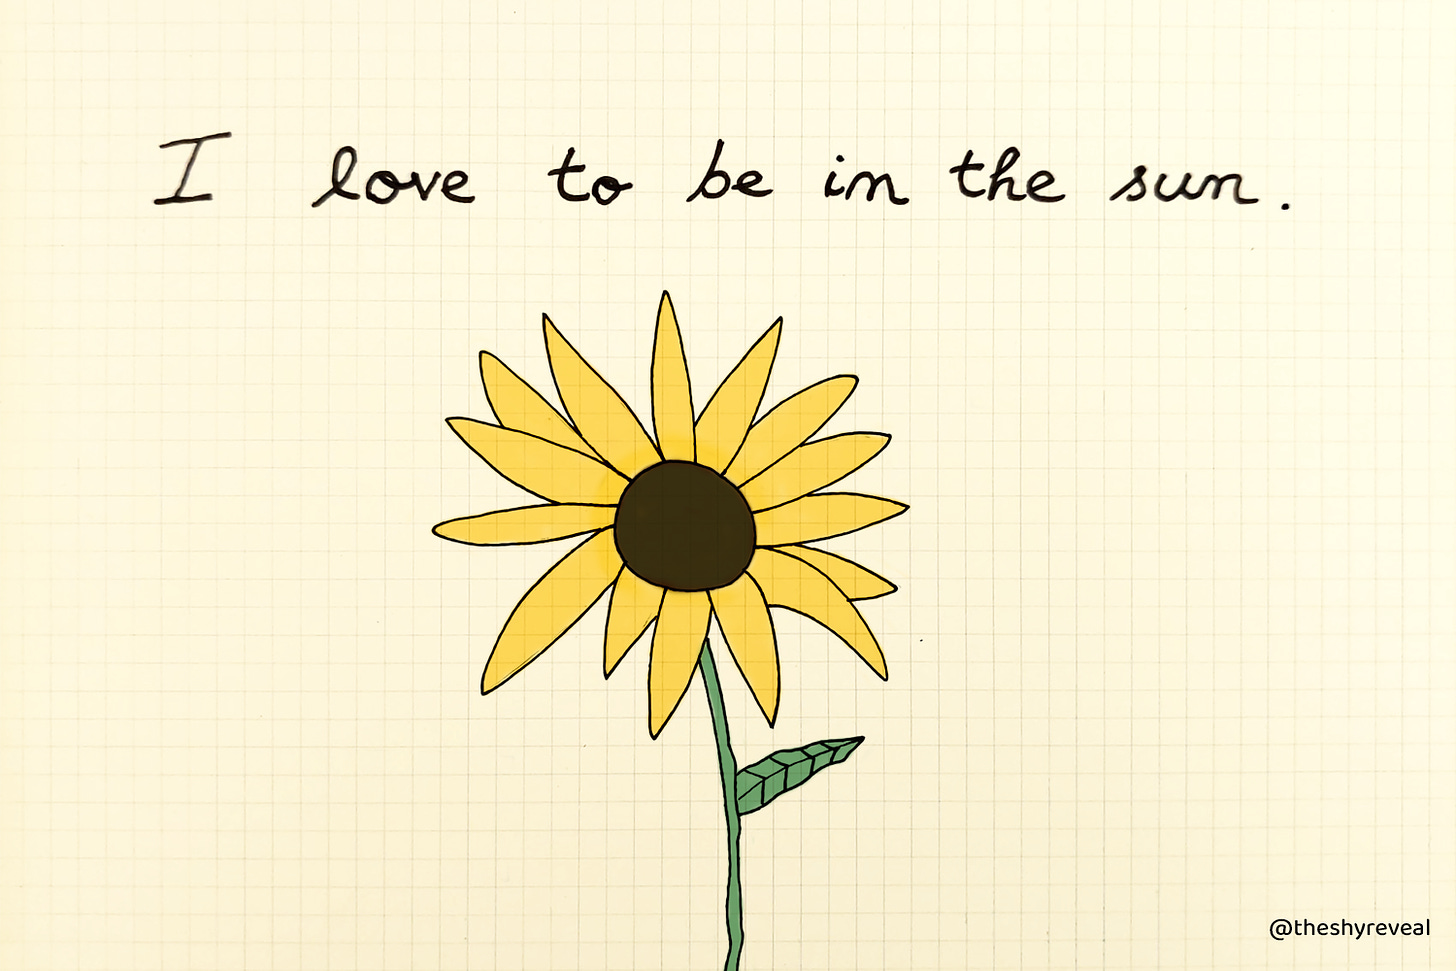 Drawing of a sunflower with the sentence: "I love to be in the sun".